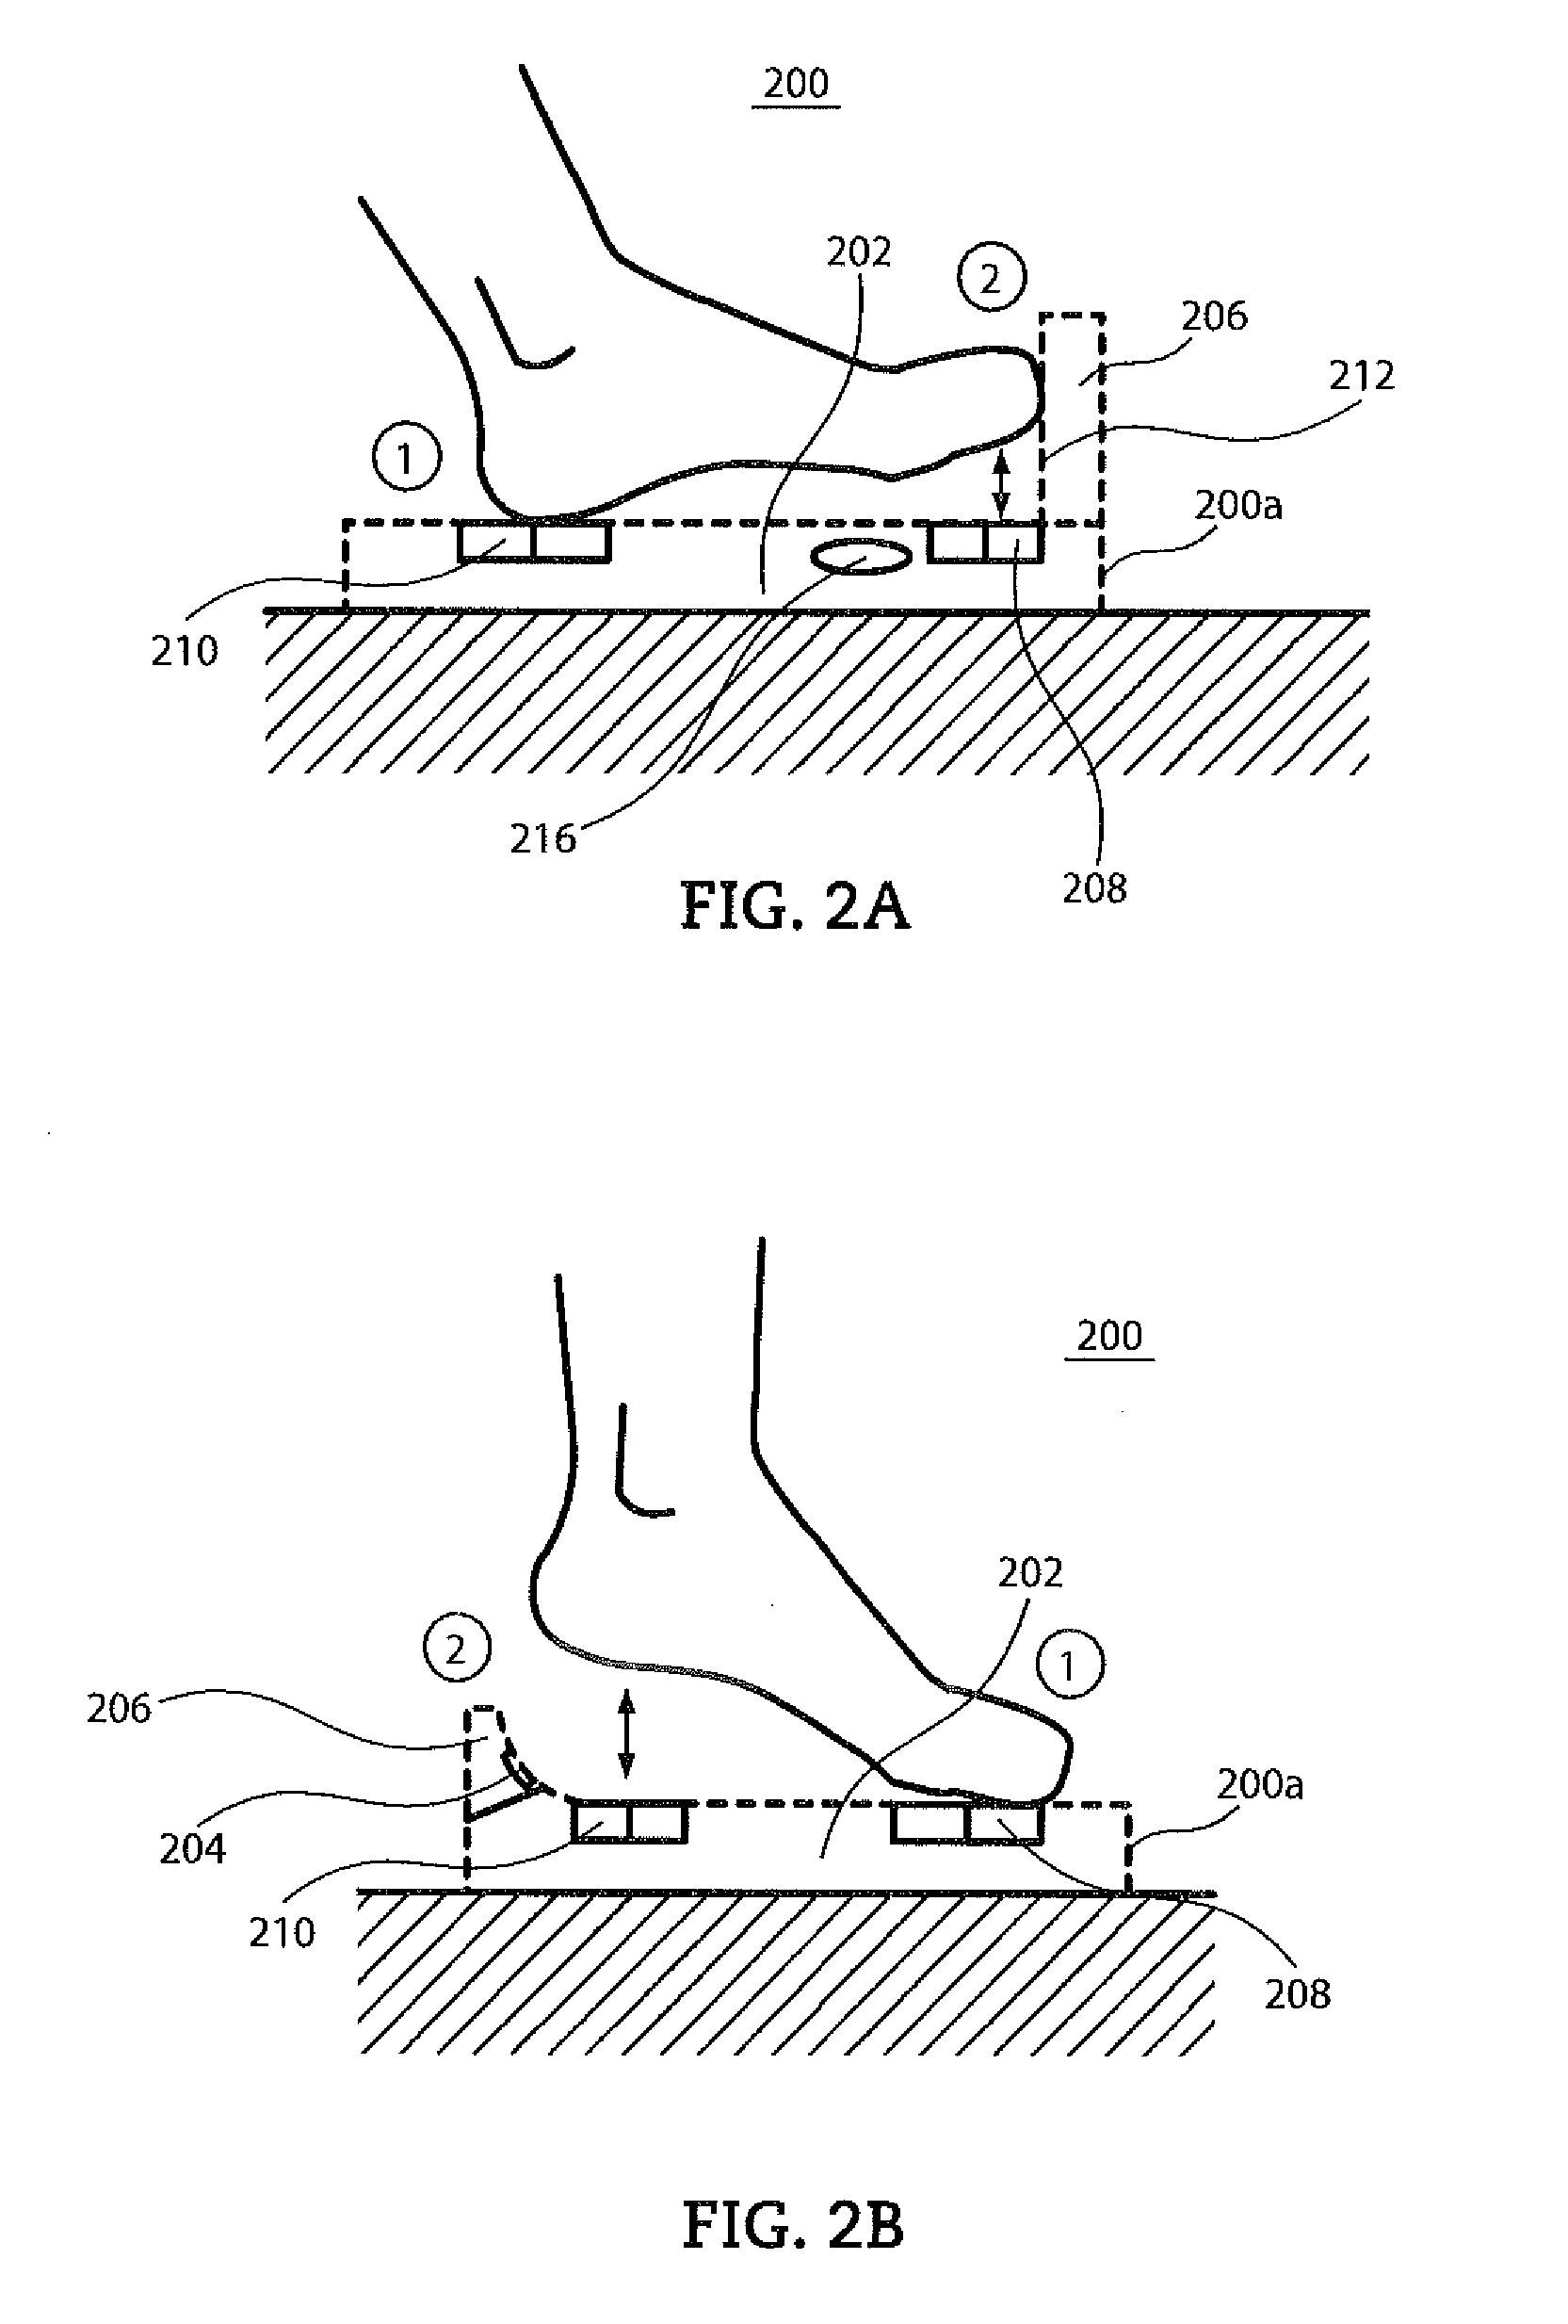 Foot pedal system and apparatus